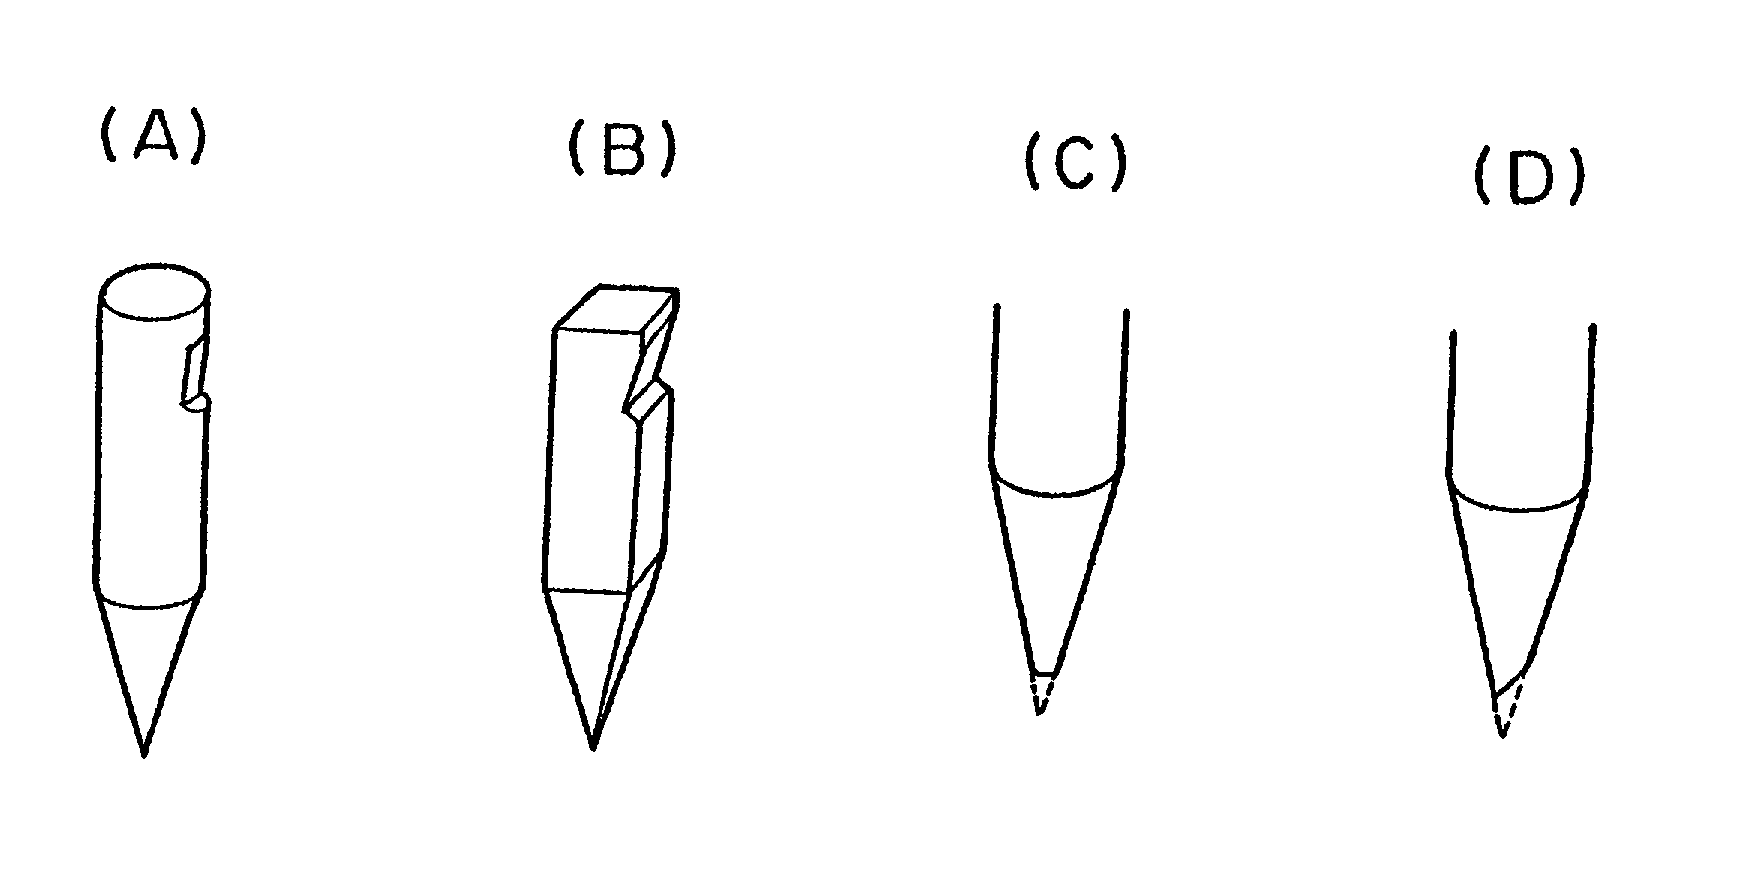 Silicon seed crystal and method for producing silicon single crystal